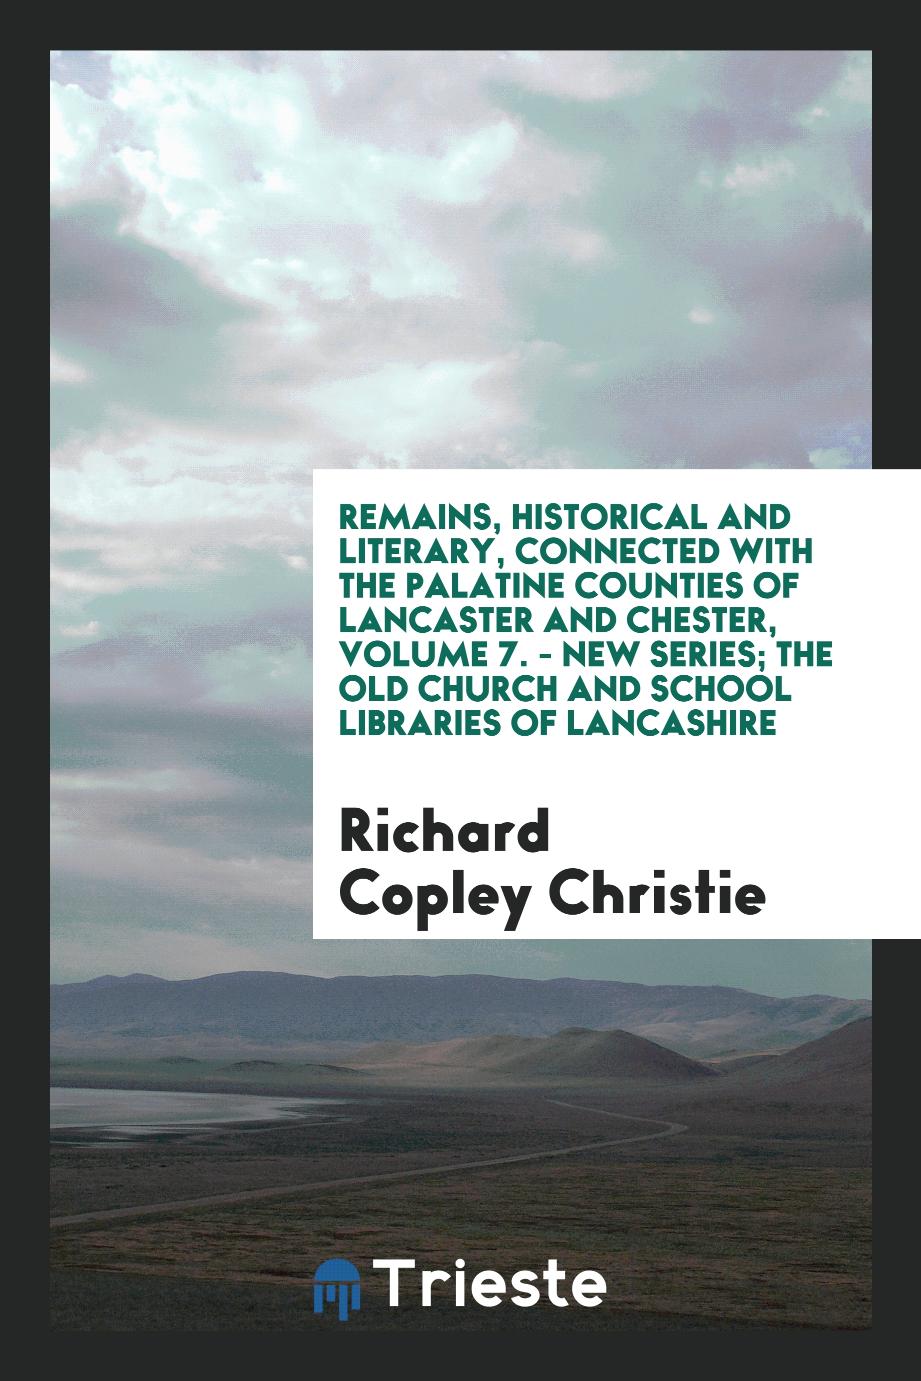 Remains, Historical and Literary, Connected with the Palatine Counties of Lancaster and Chester, Volume 7. - New Series; The Old Church and School Libraries of Lancashire